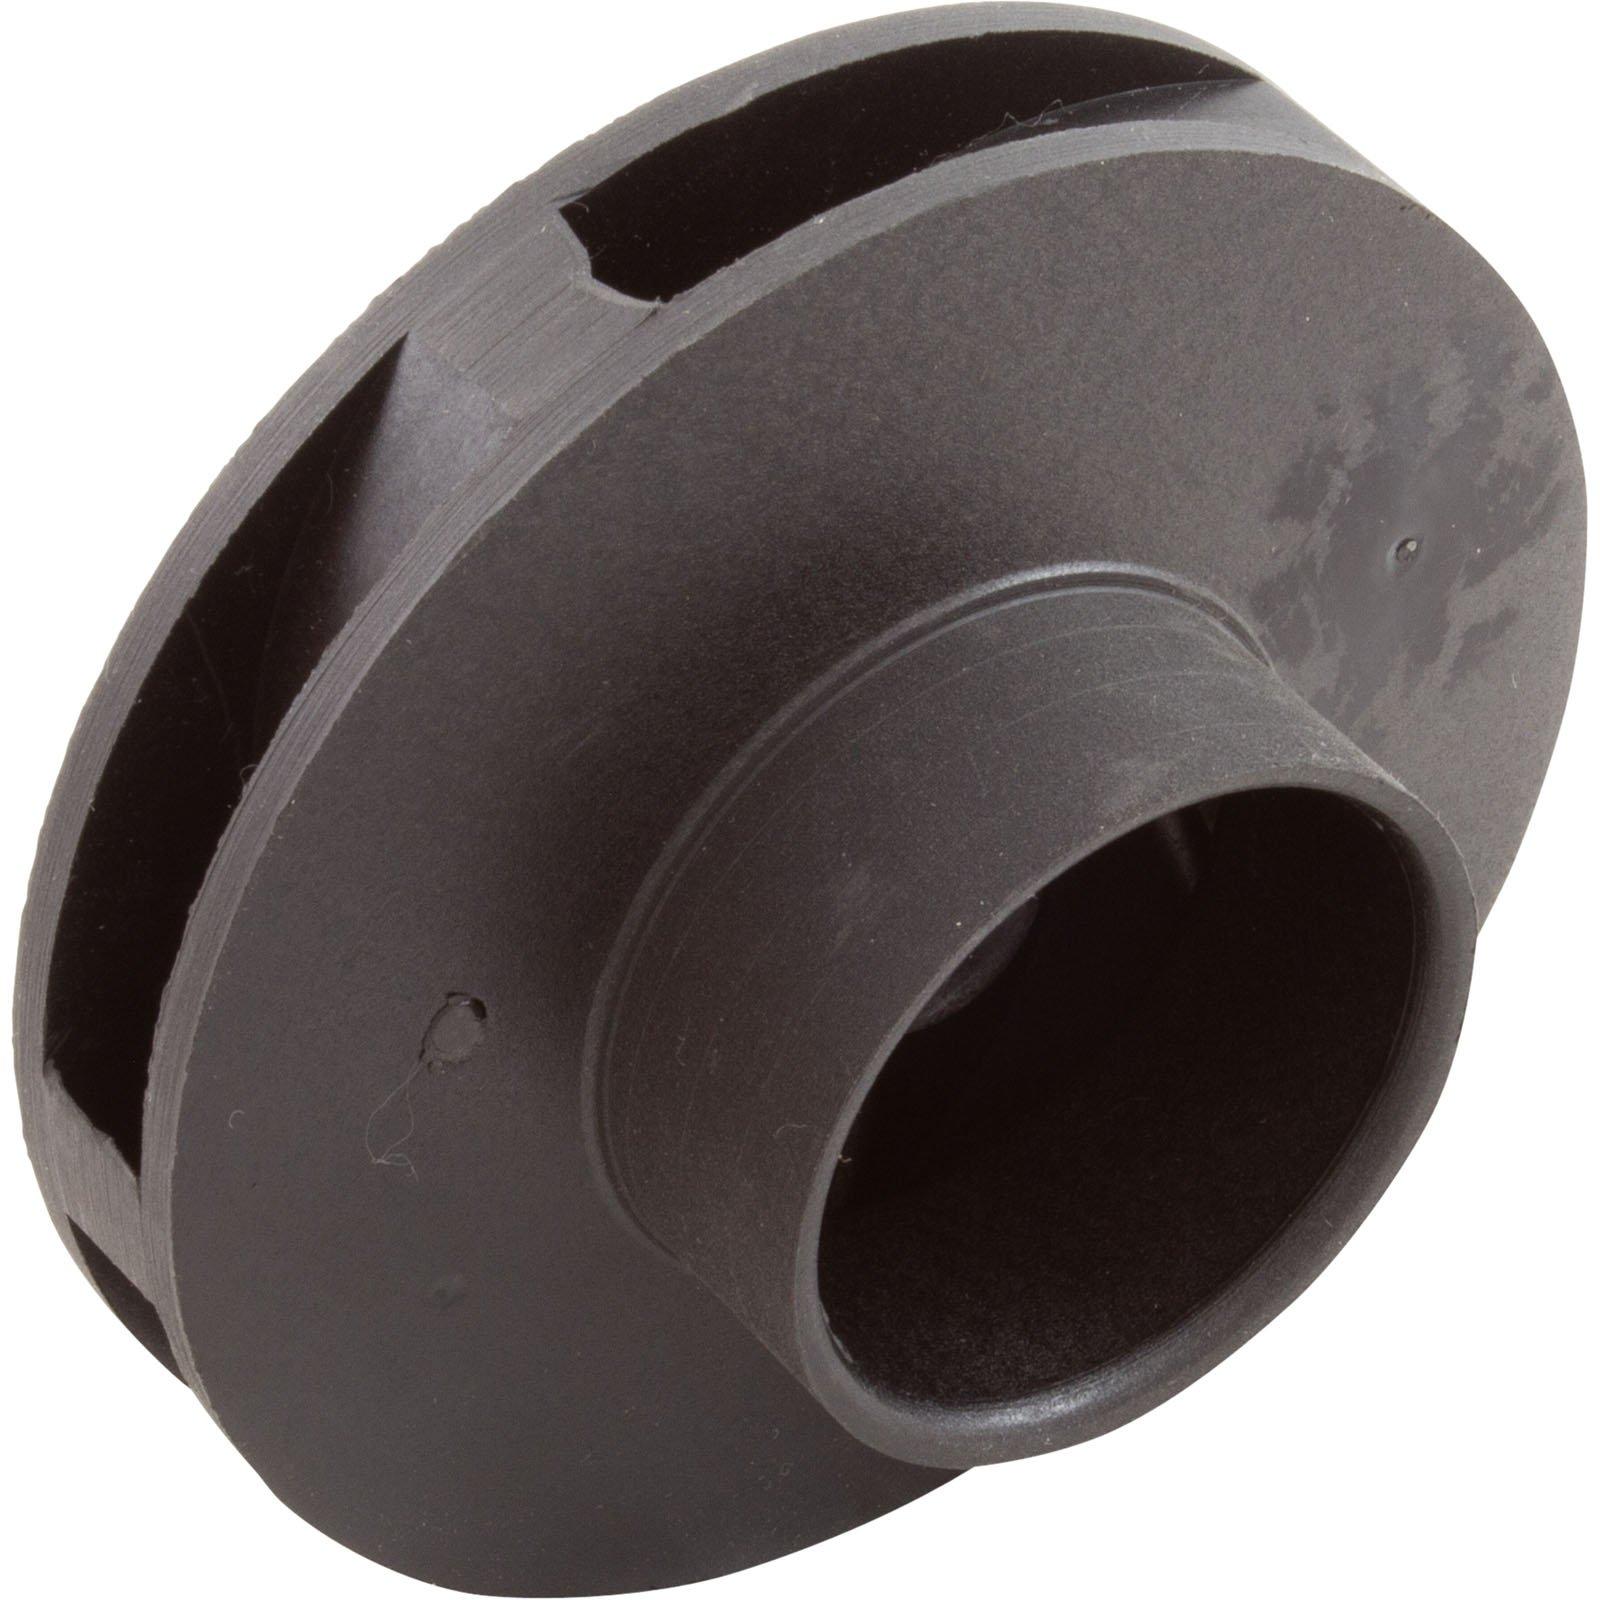 Raypak - Protege 1 HP Impeller for RPAGP100/102 Above Ground Pool Pumps